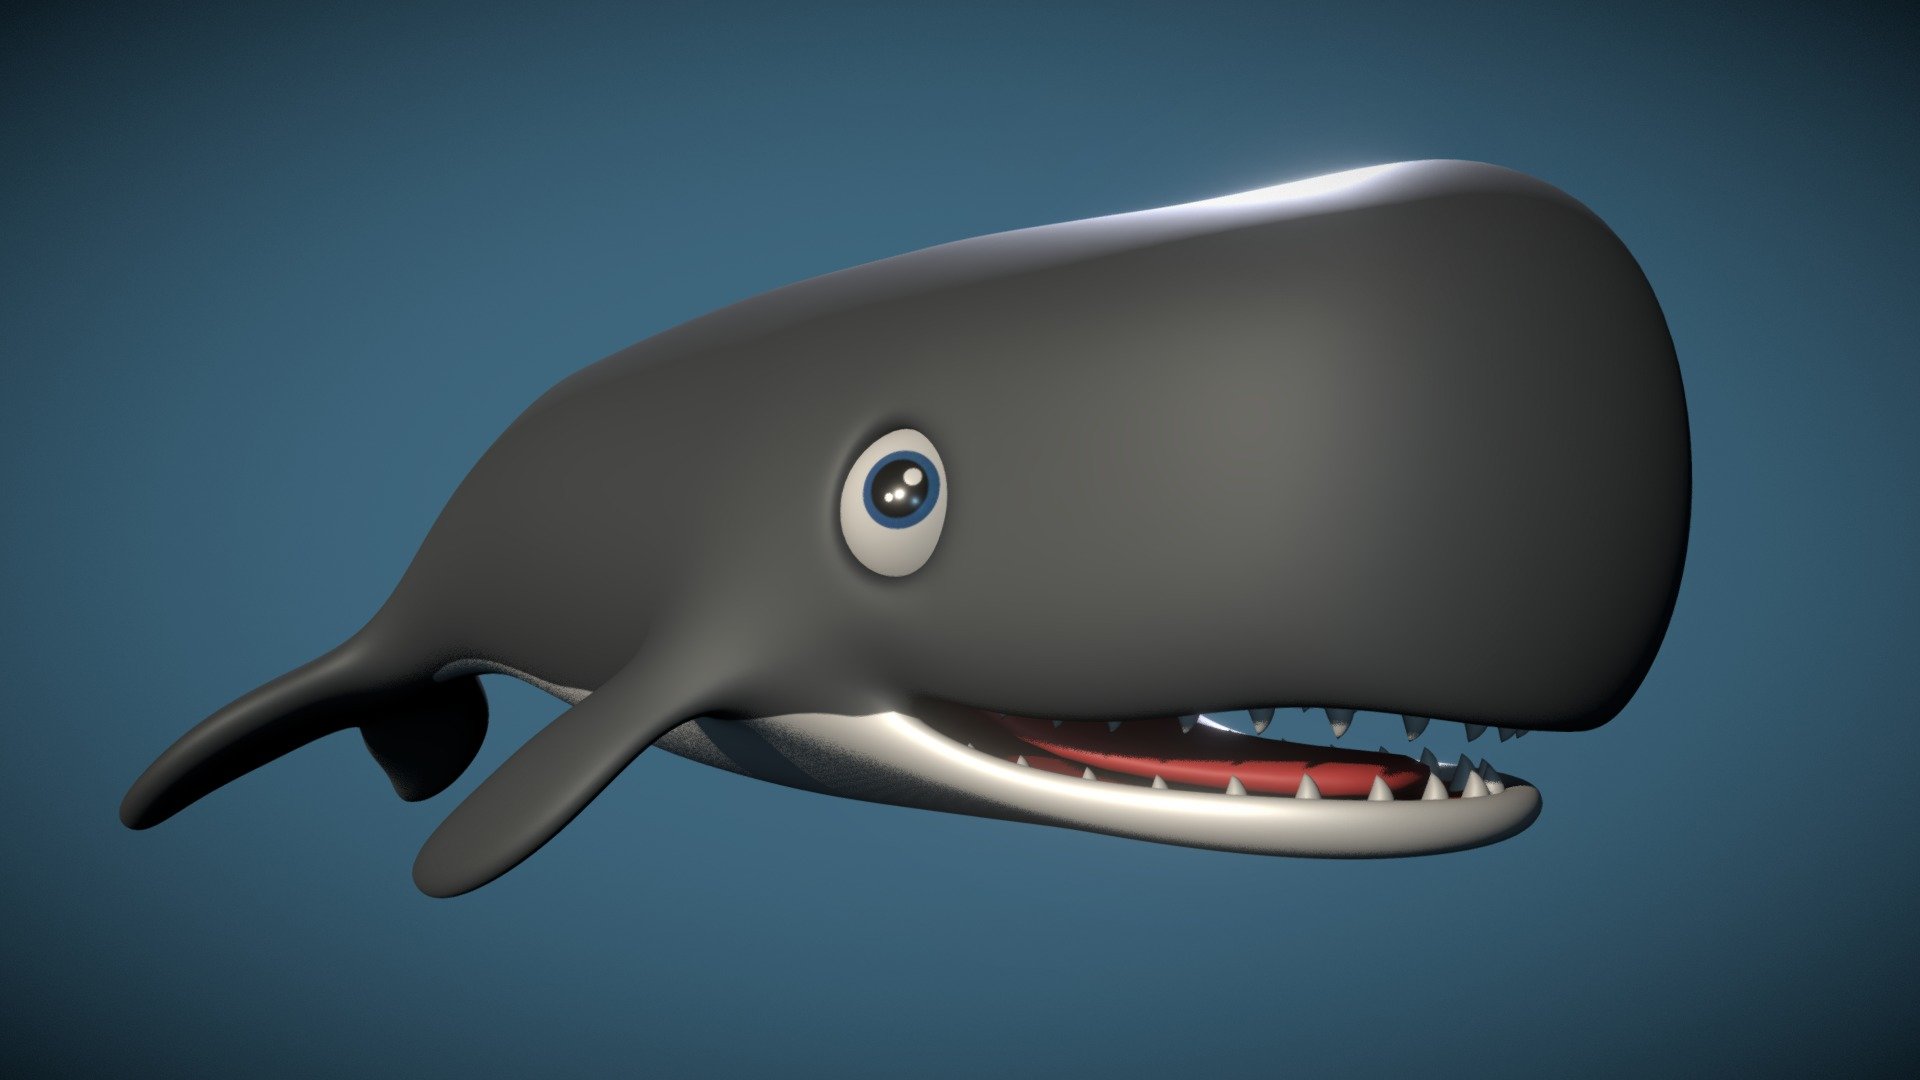 High and low poly 3d model of Cartoon Whale.

Available on :http://3dgalaxy.net/index.php/product/cartoon-whale/ - Cartoon Whale - 3D model by 3DGalaxy.net (@3dsmartphone) 3d model